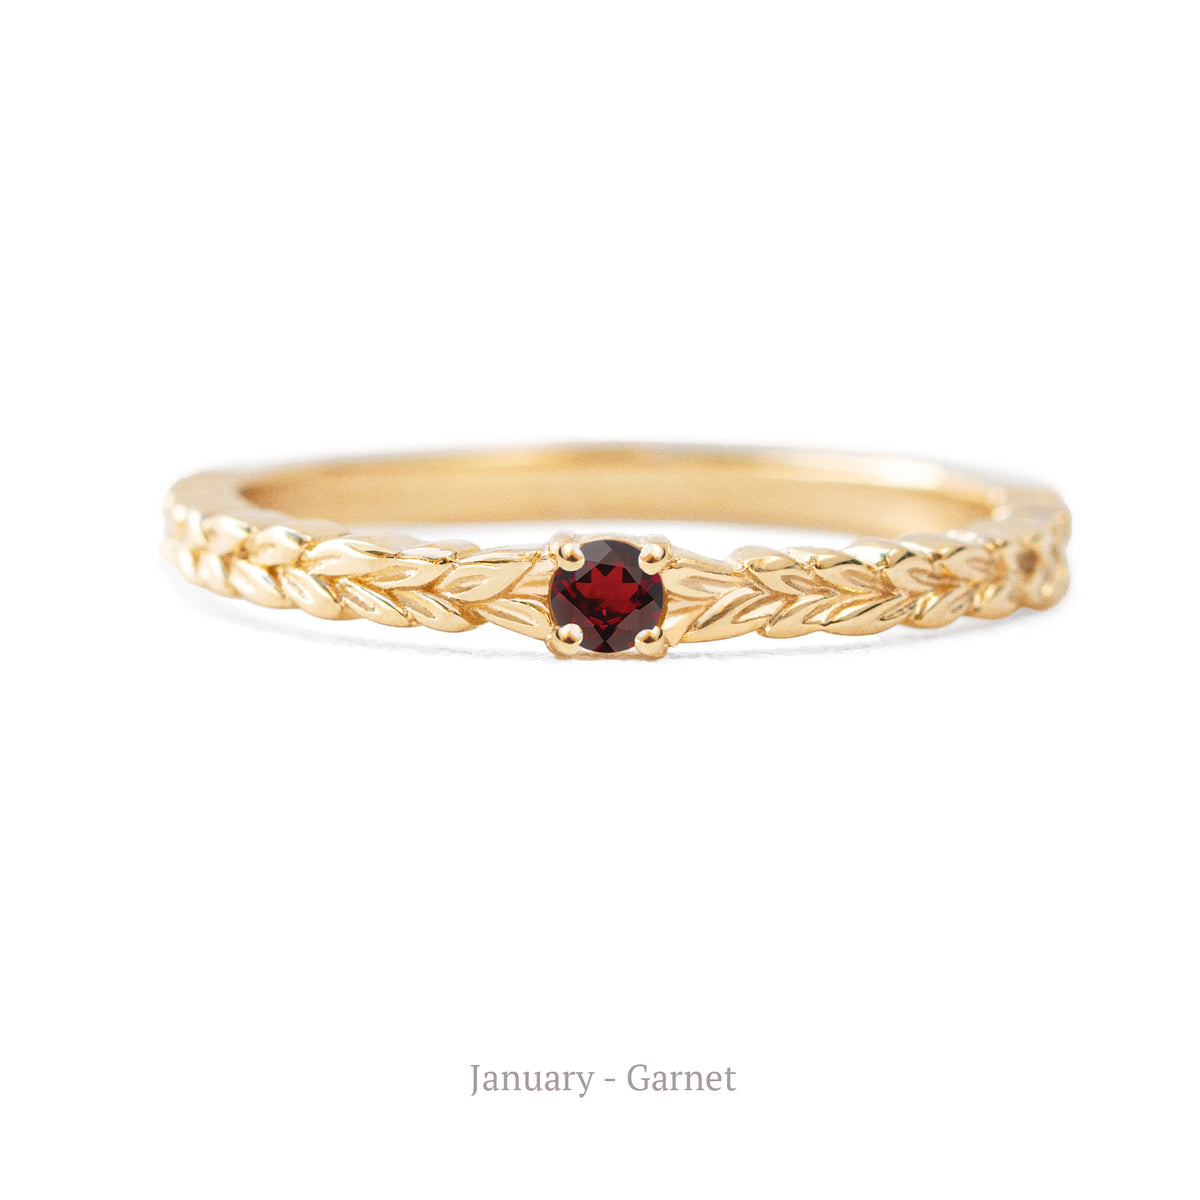 Jamie Park Jewelry - Meadow Birthstone Ring Celebrate your or special one&#39;s birthday with the Meadow Birthstone Ring in 14K gold. This versatile ring features the intricate Meadow pattern, adding effortless elegance to your everyday outfits. With its sophisticated design, it&#39;s the perfect choice for any occasion - from casual to formal.&amp;nbsp;